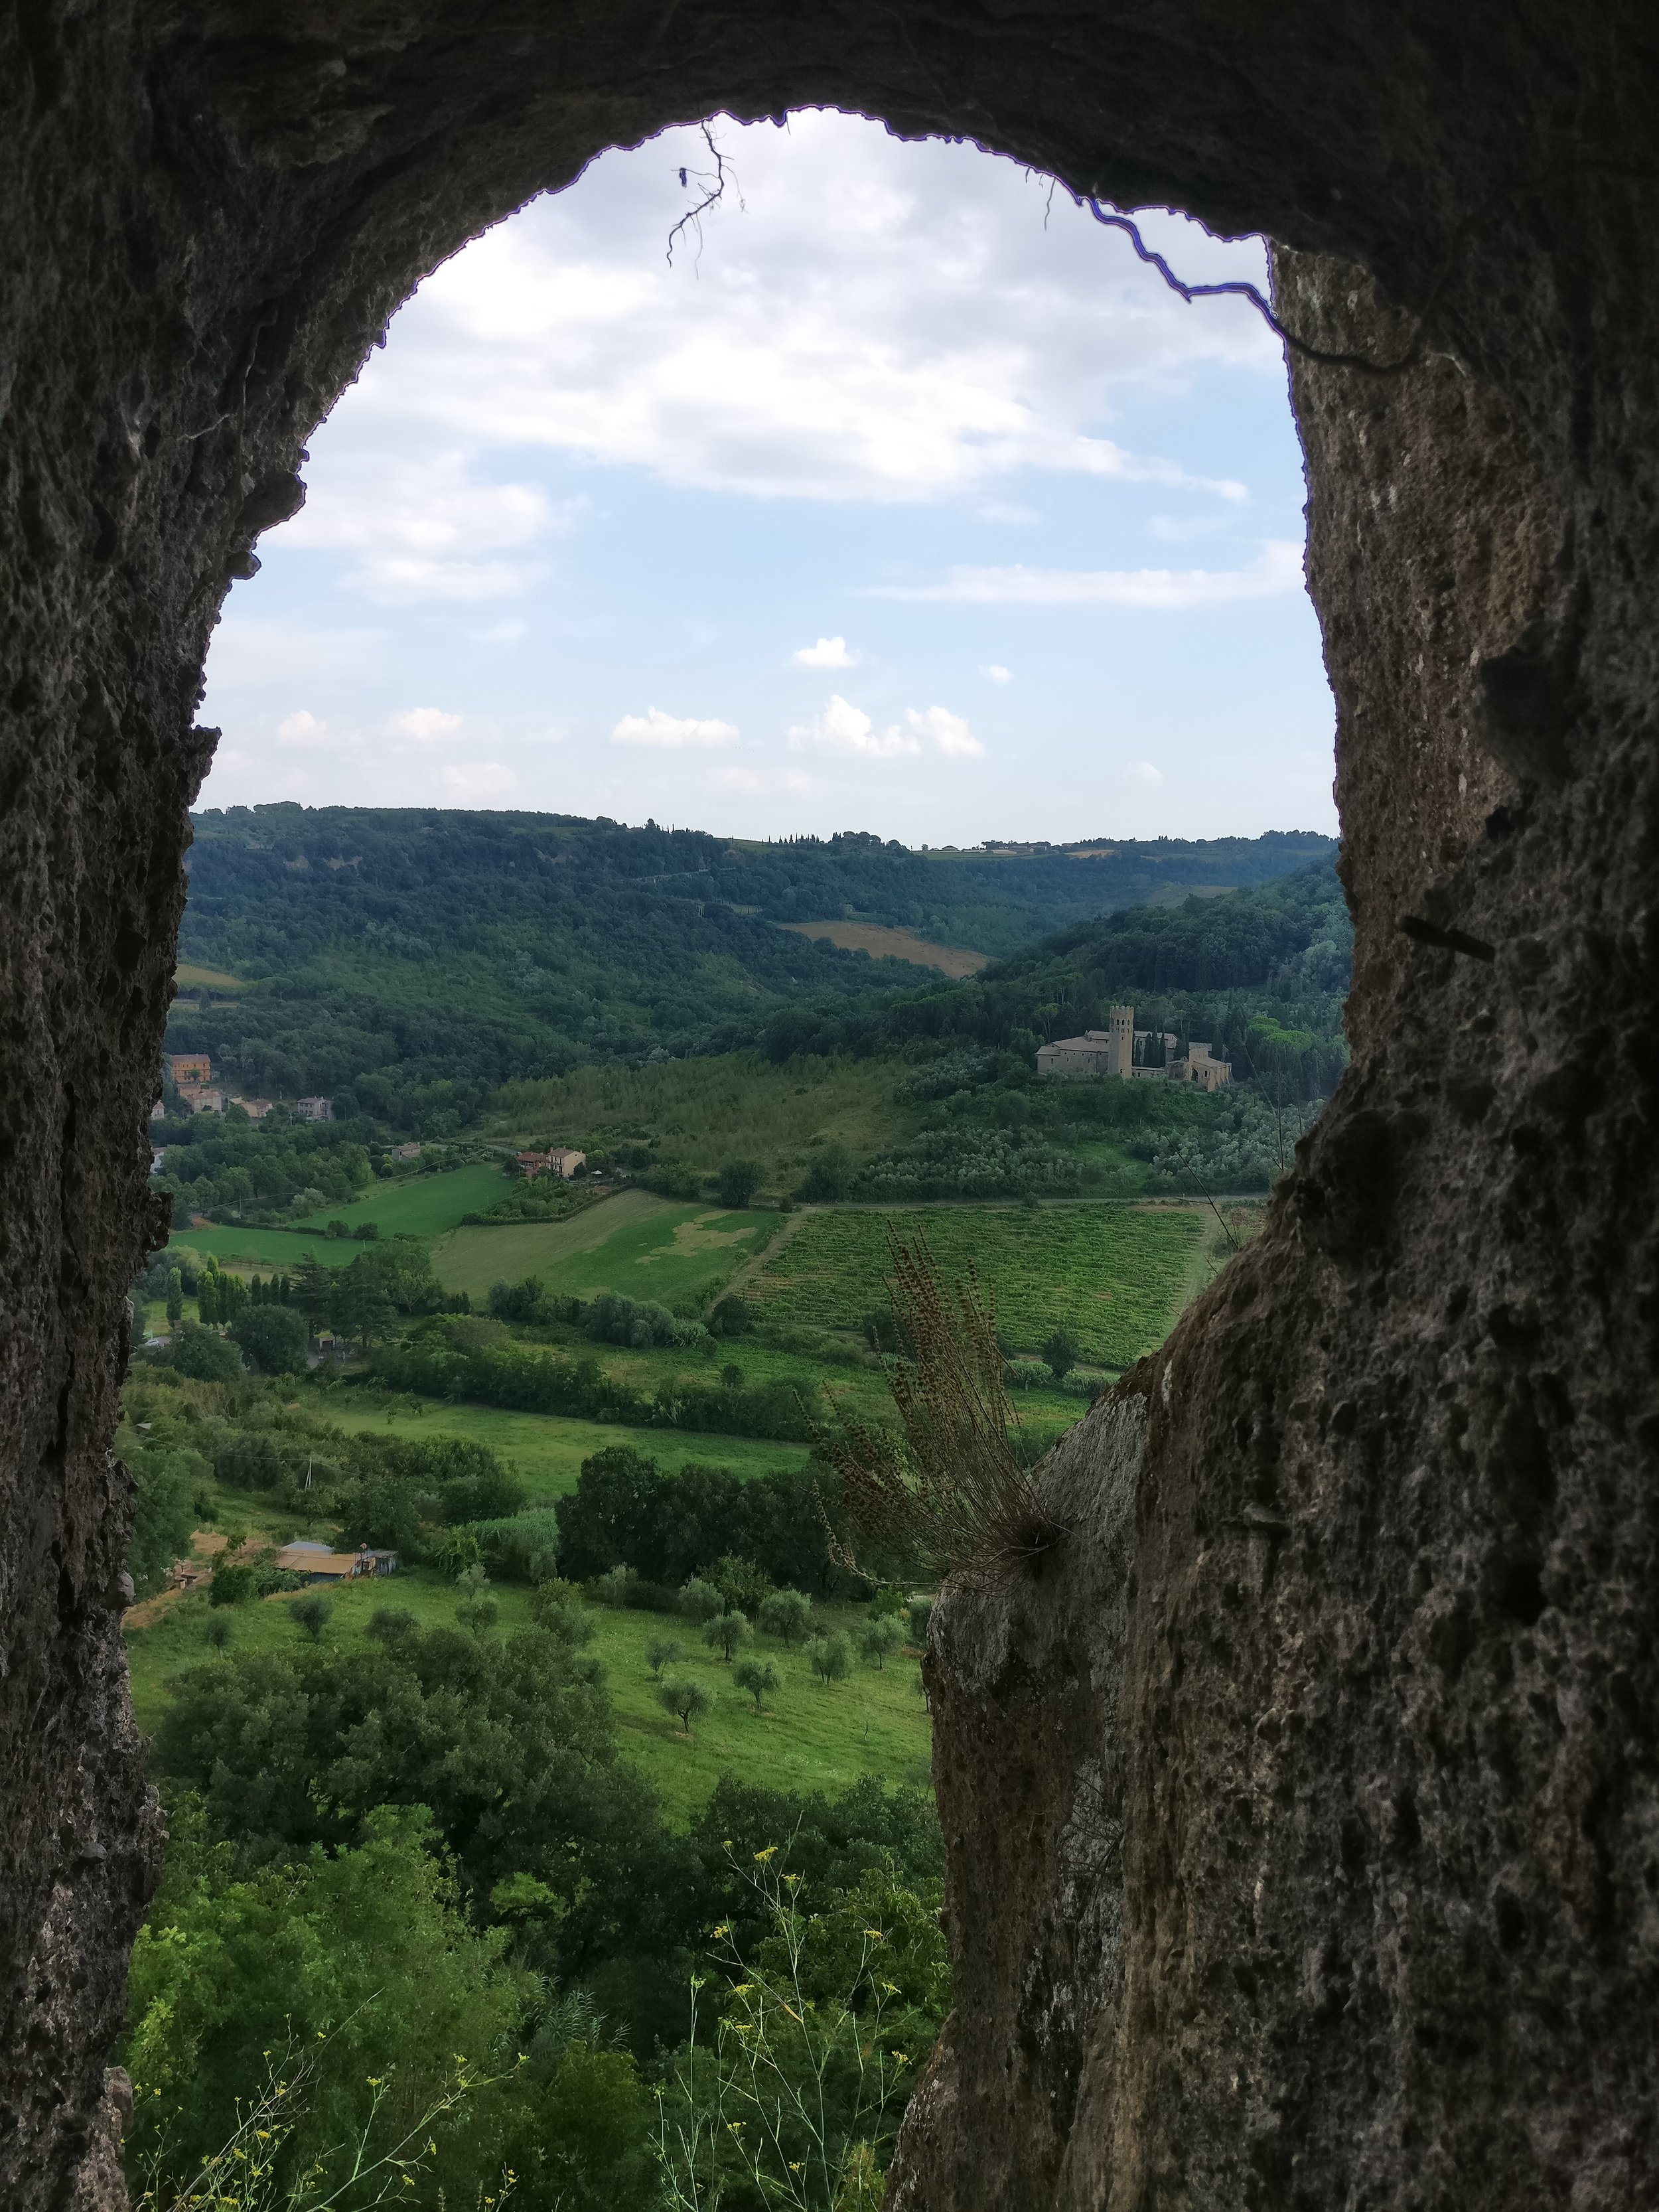  A view from inside the plug at Orvieto 